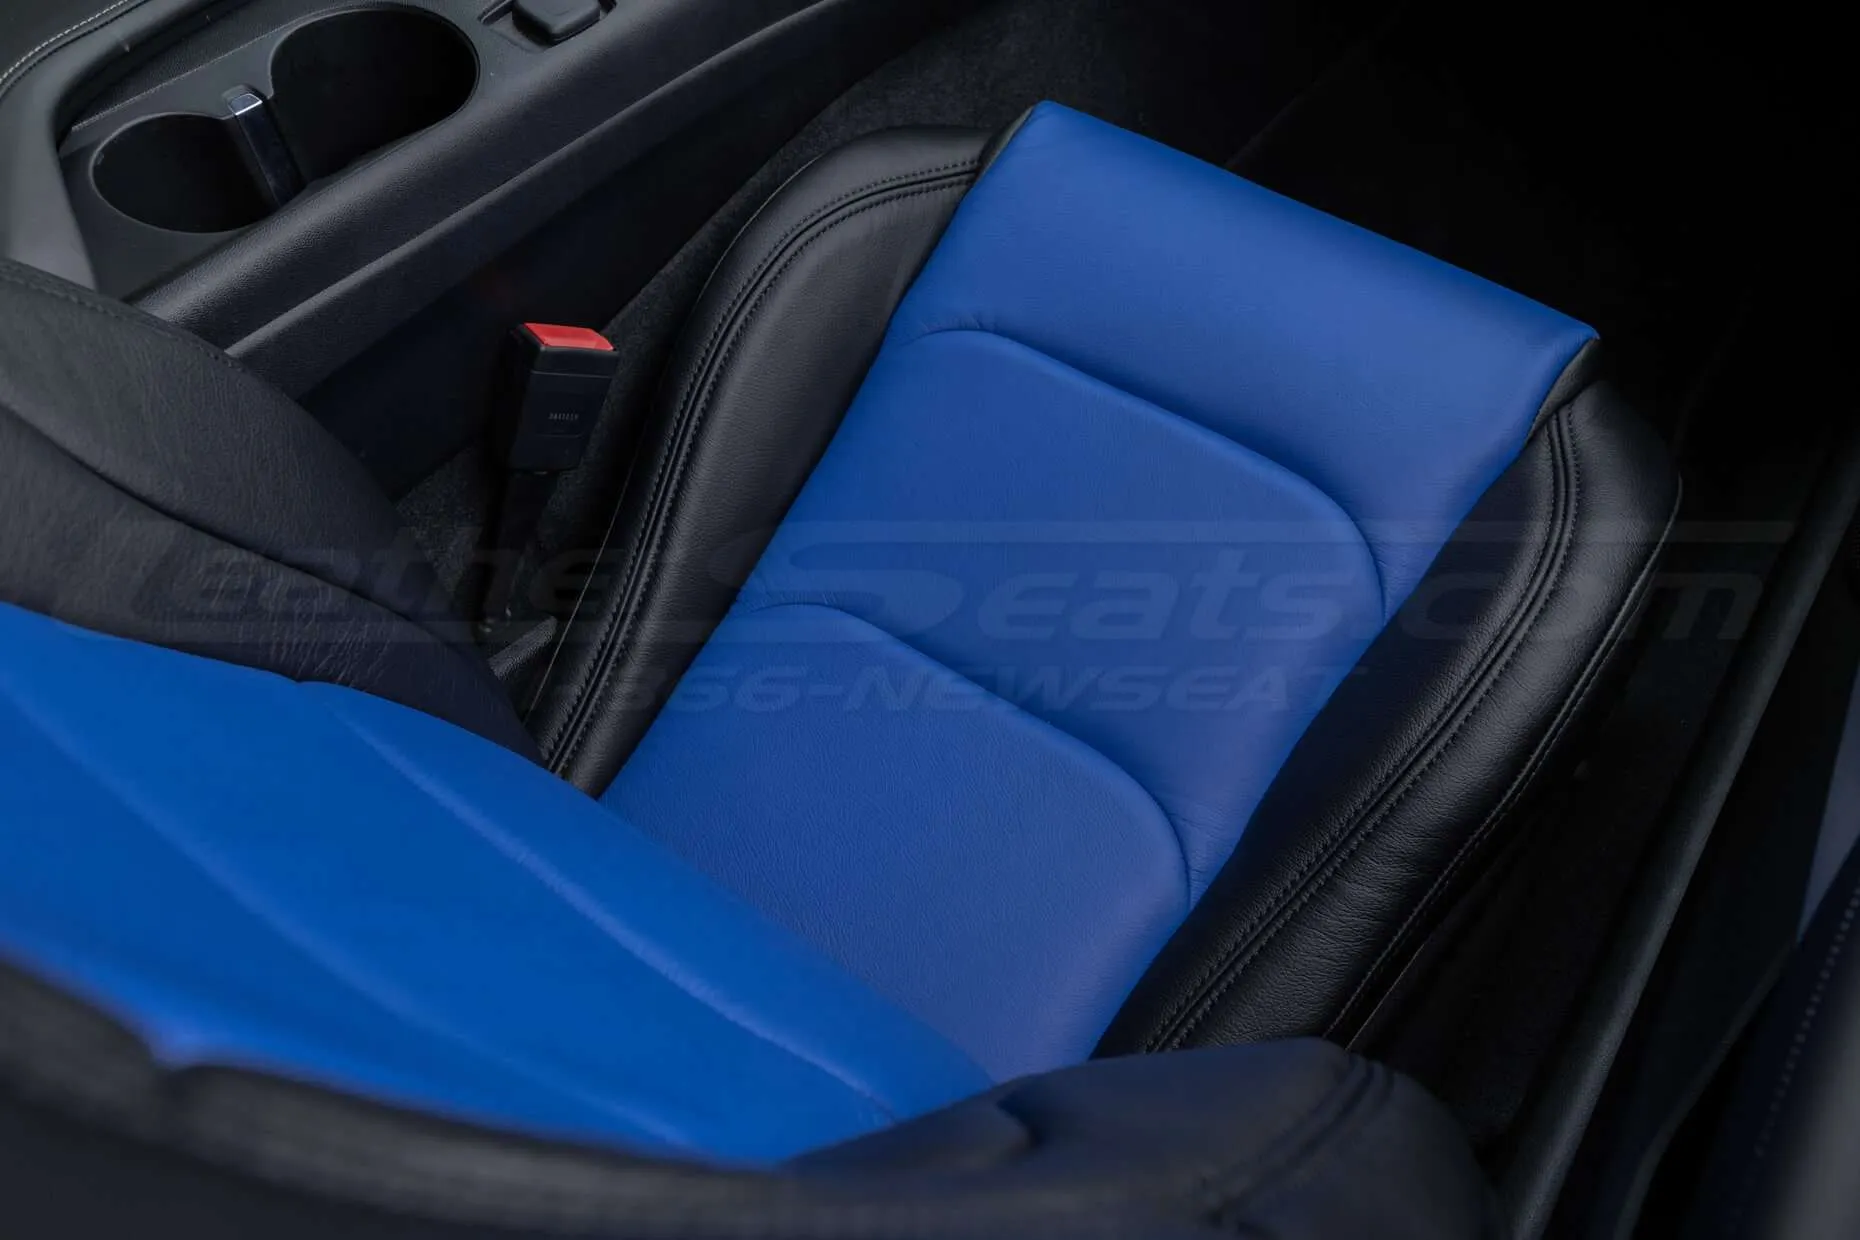 Top down view of front seat cushion in Black & Cobalt